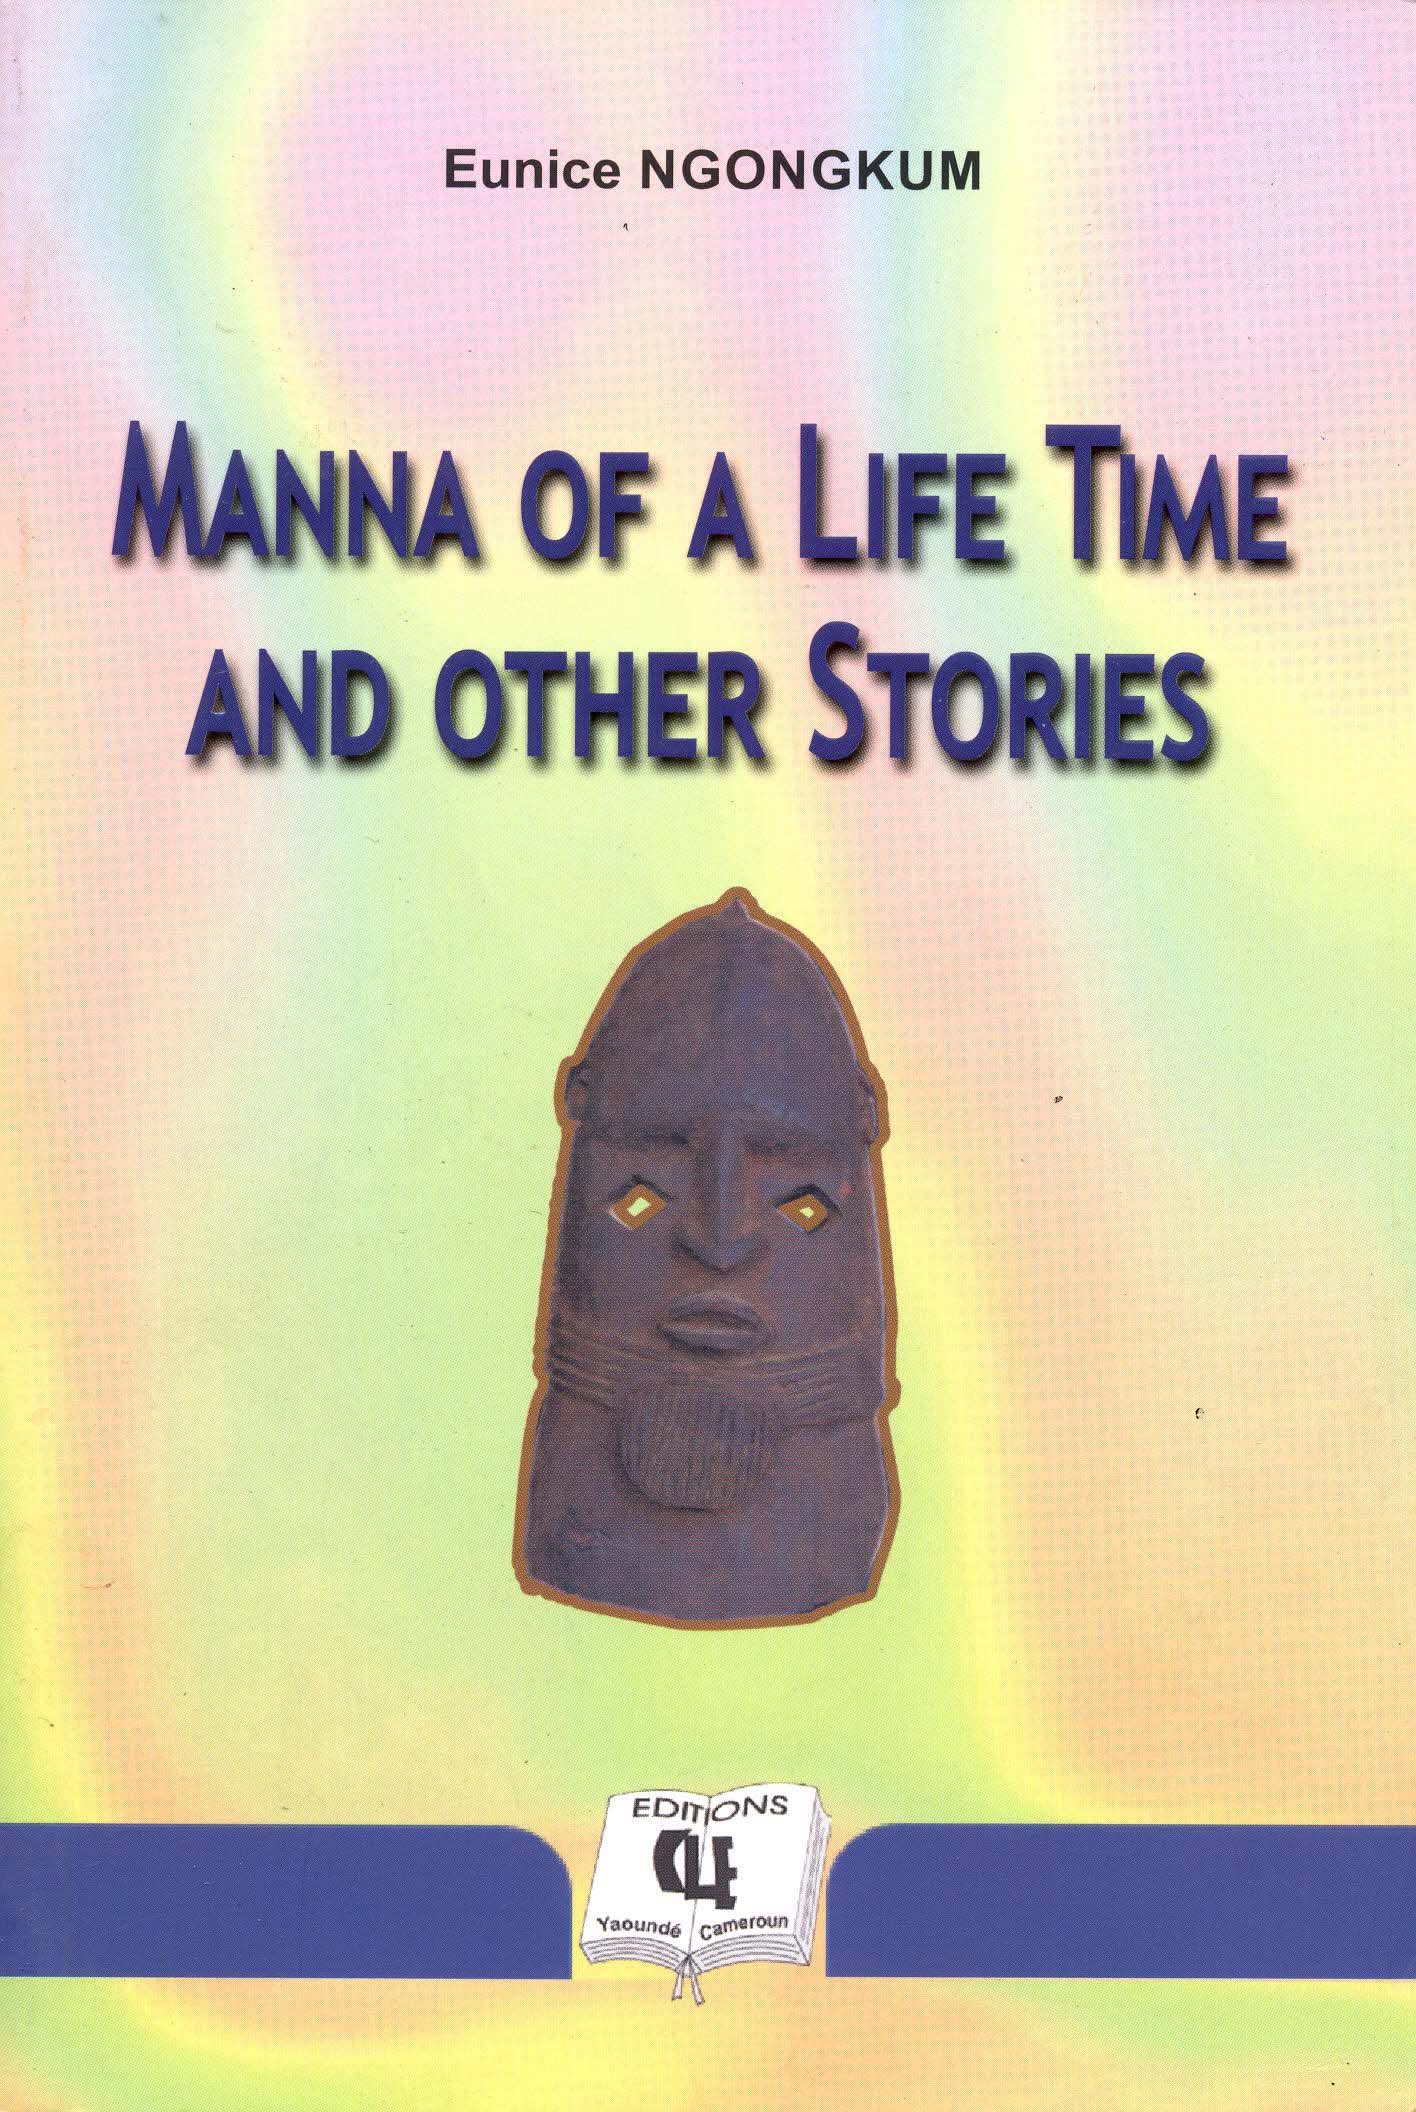 Manna of a life time and other stories